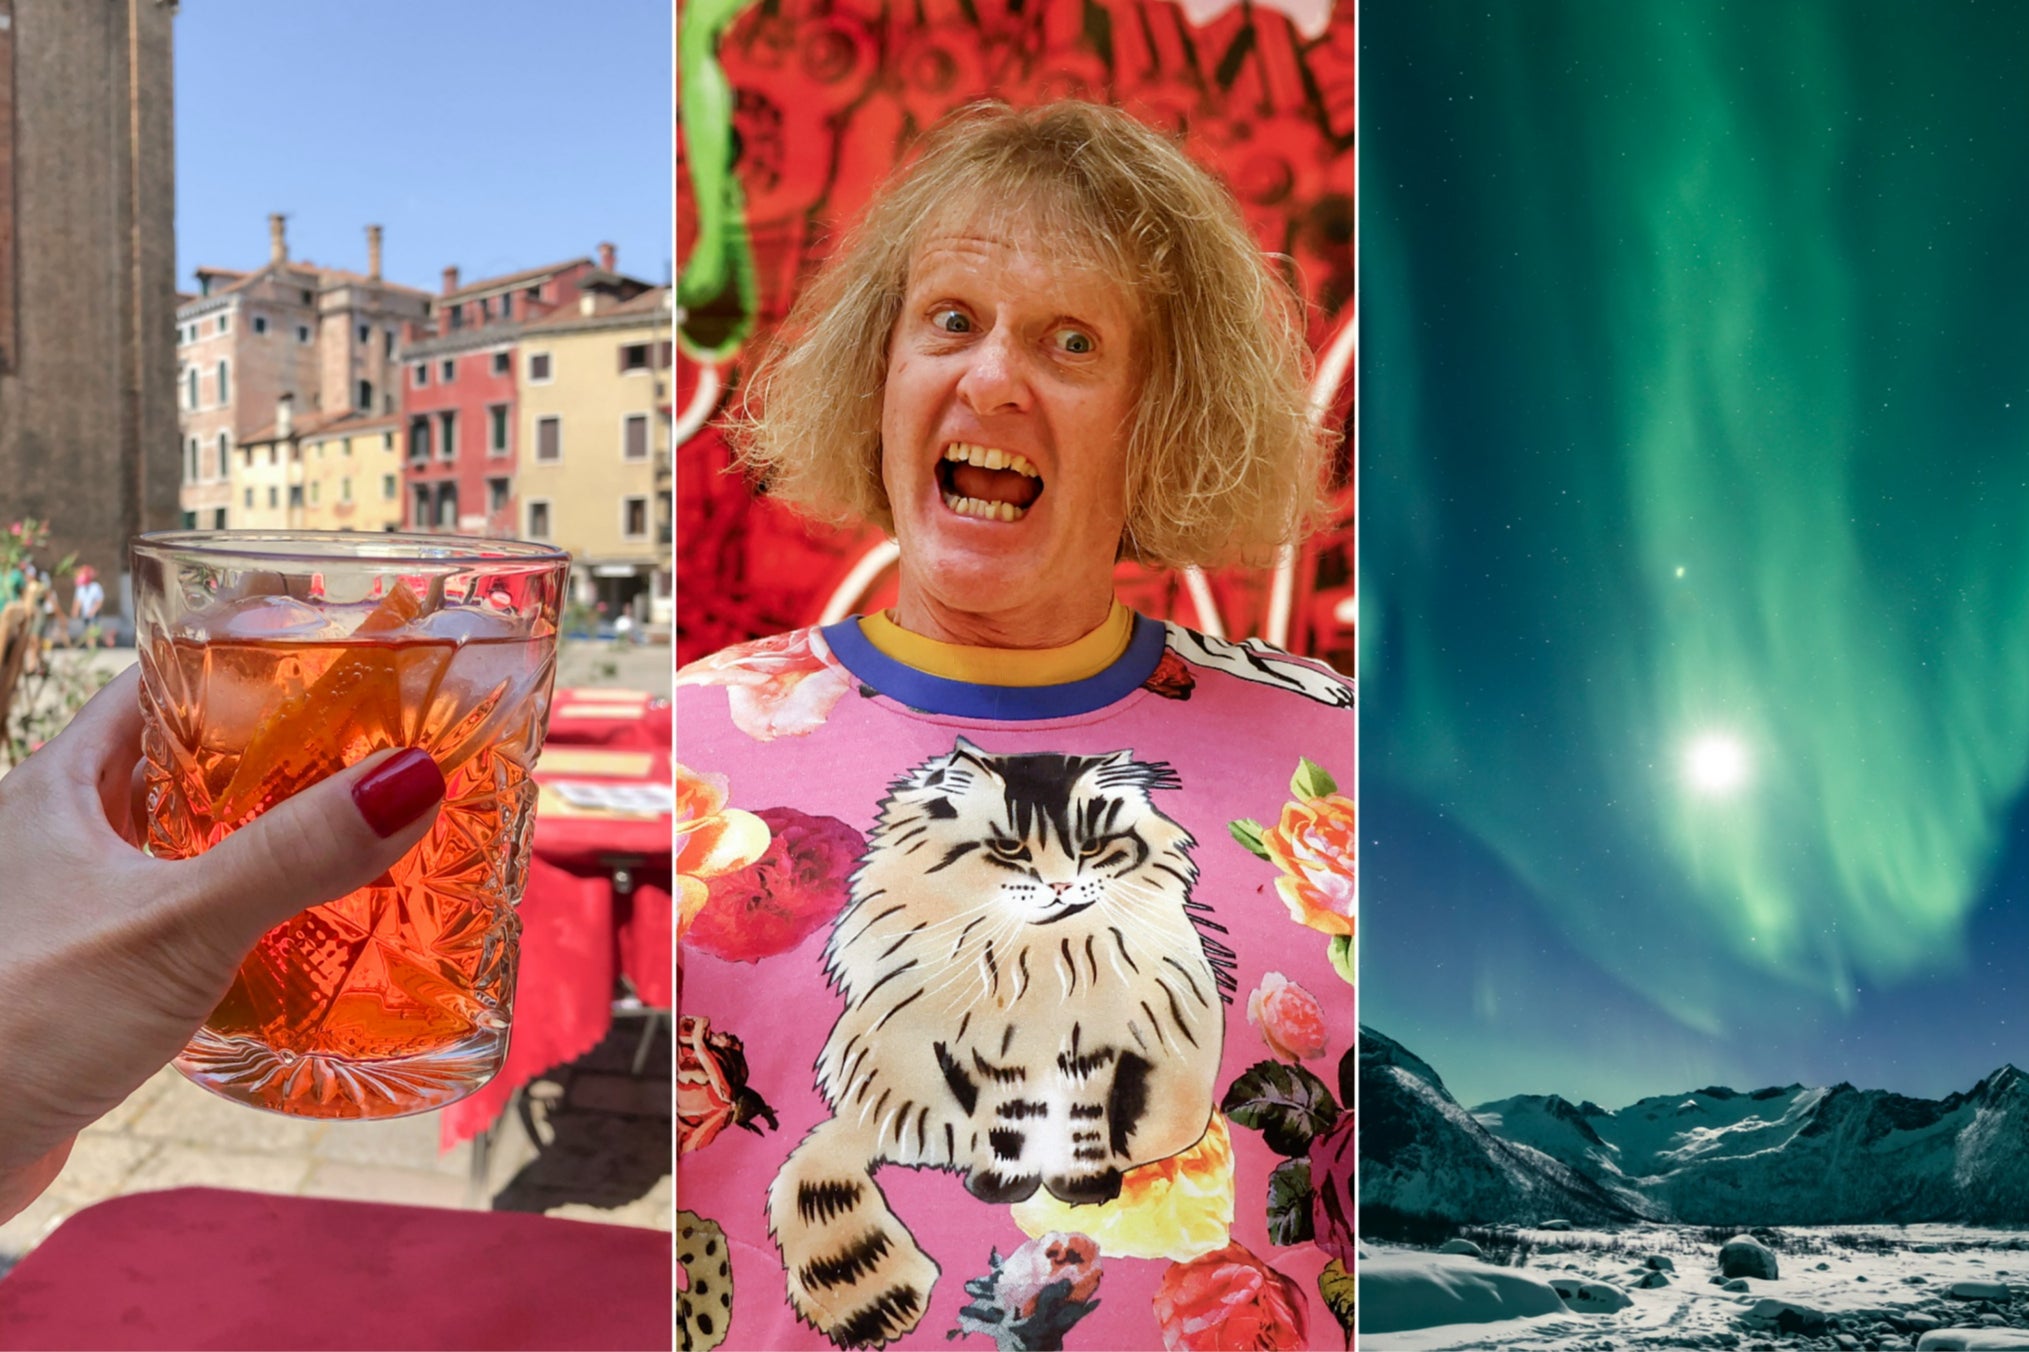 On their way out: ‘Aperol anything’, Grayson Perry, and the Northern Lights